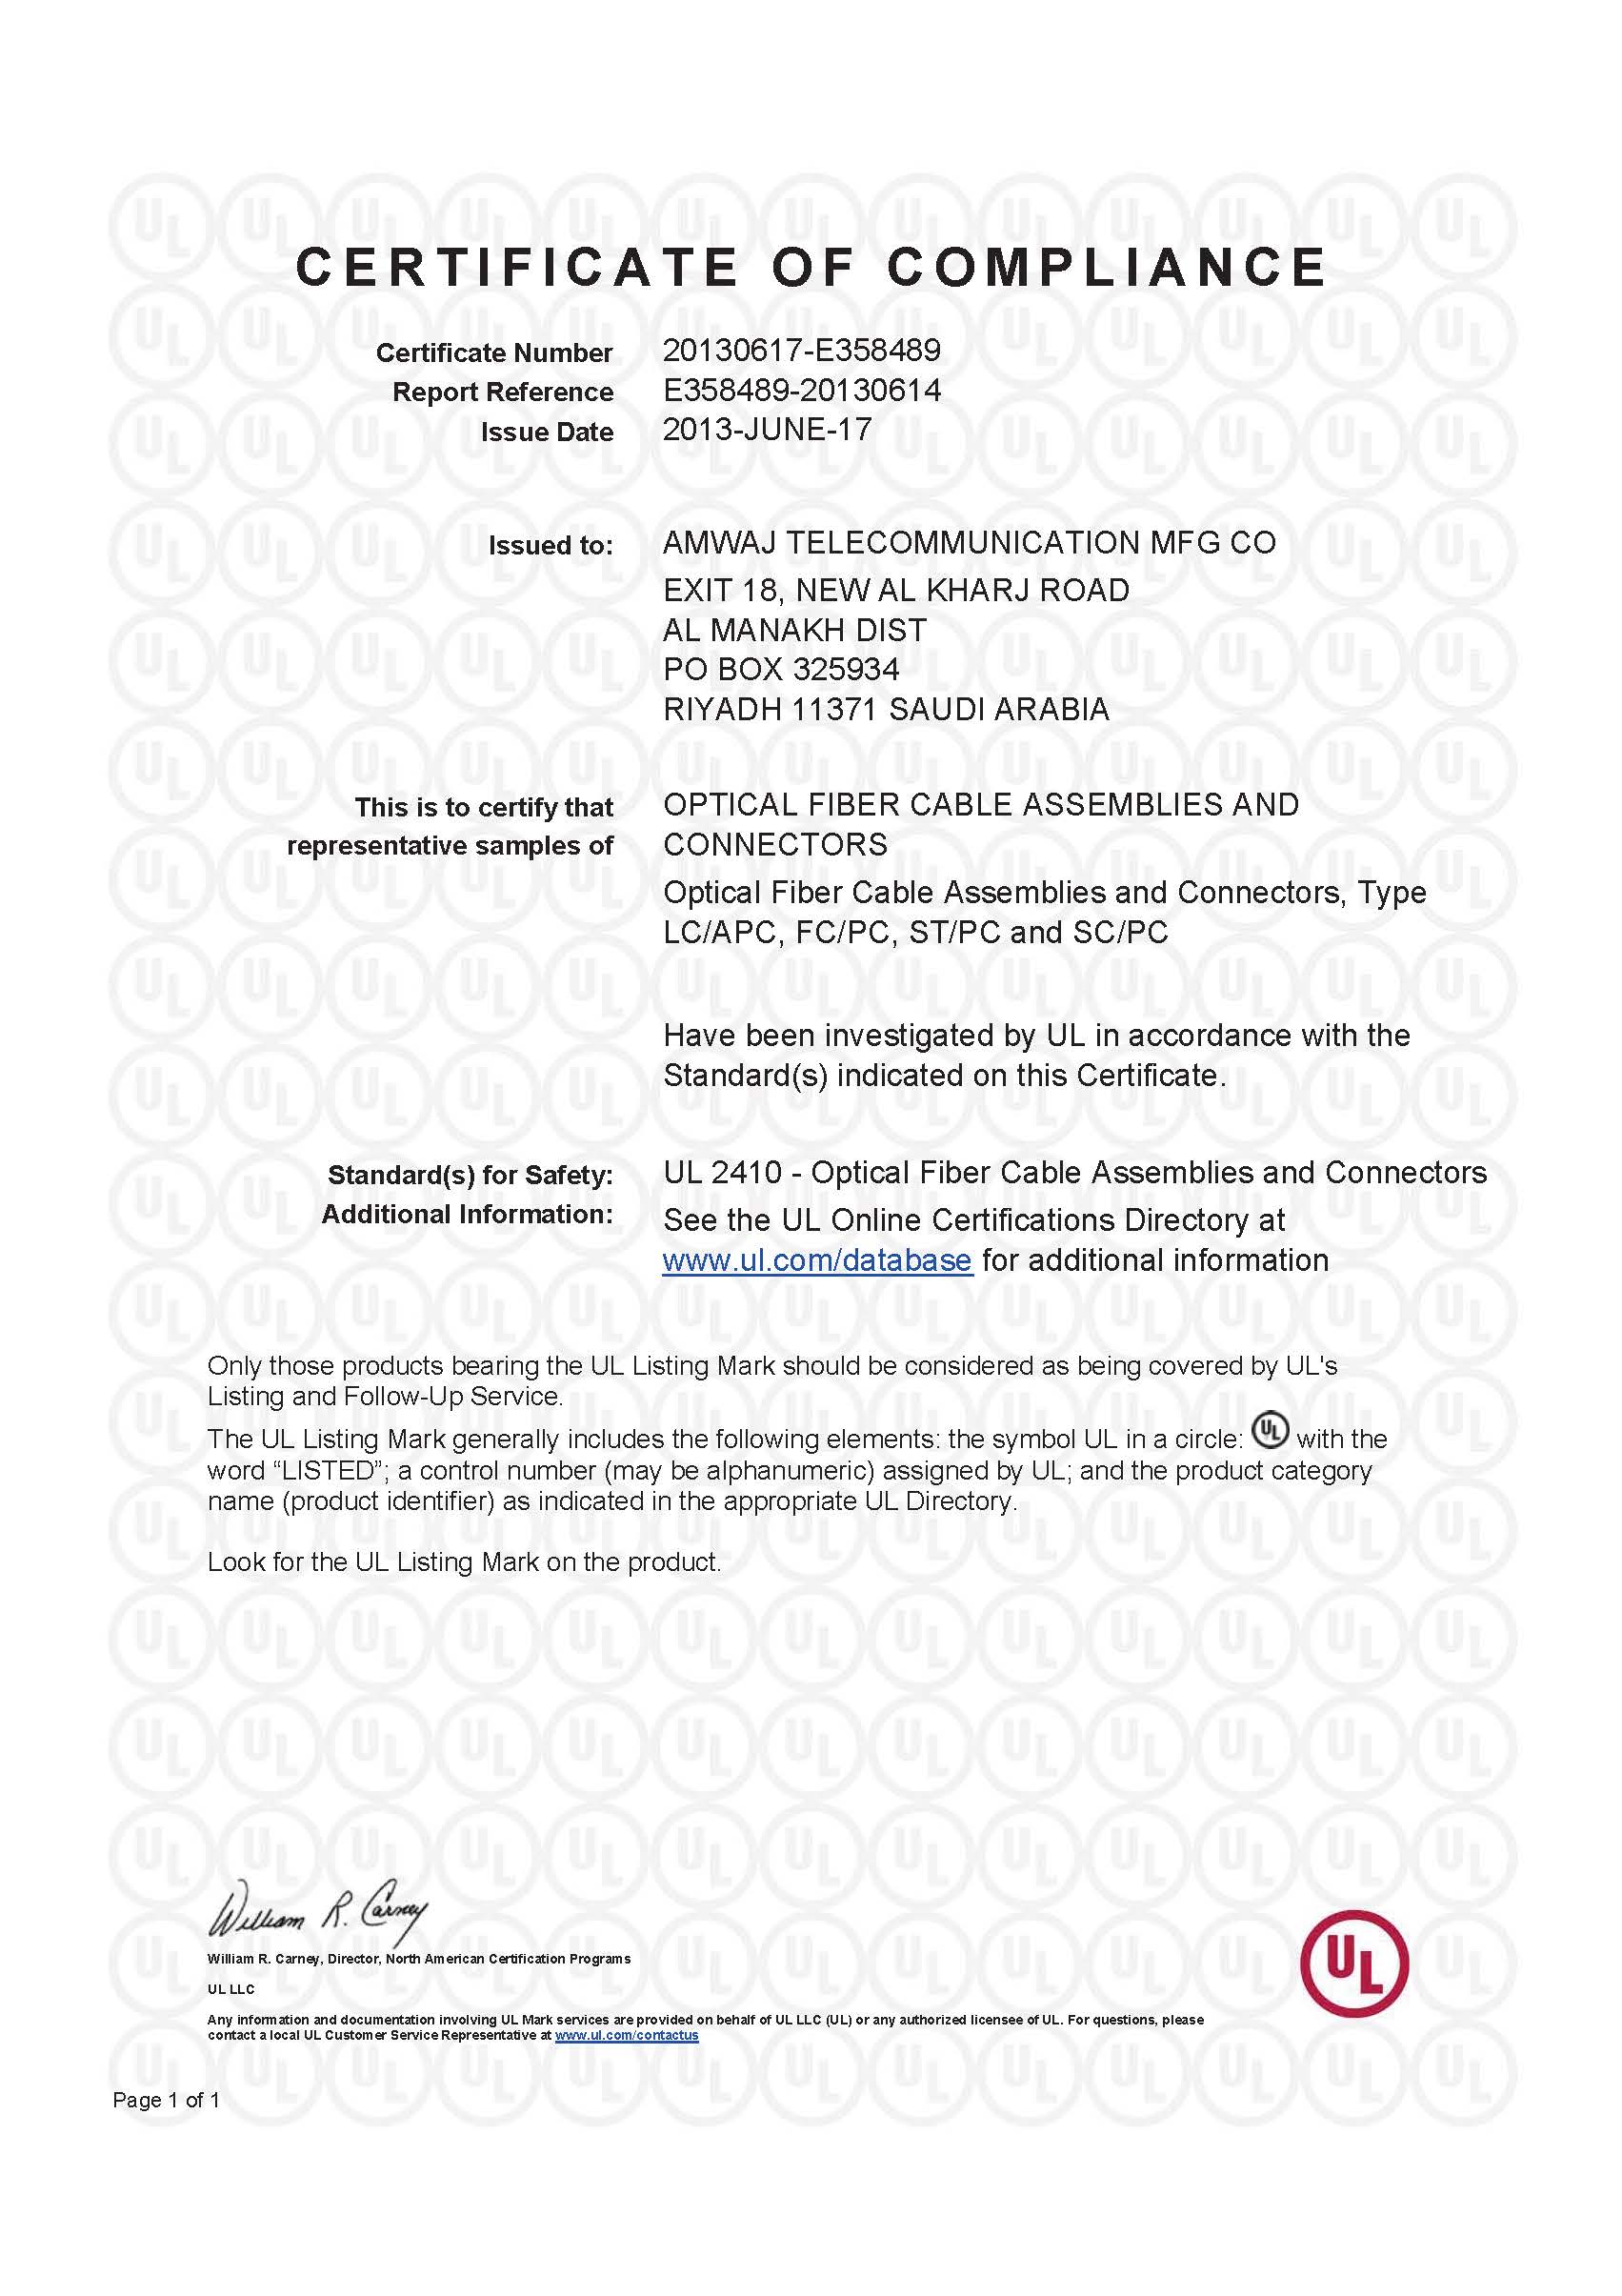 UL listing certificate for Fiber cables and assemblies